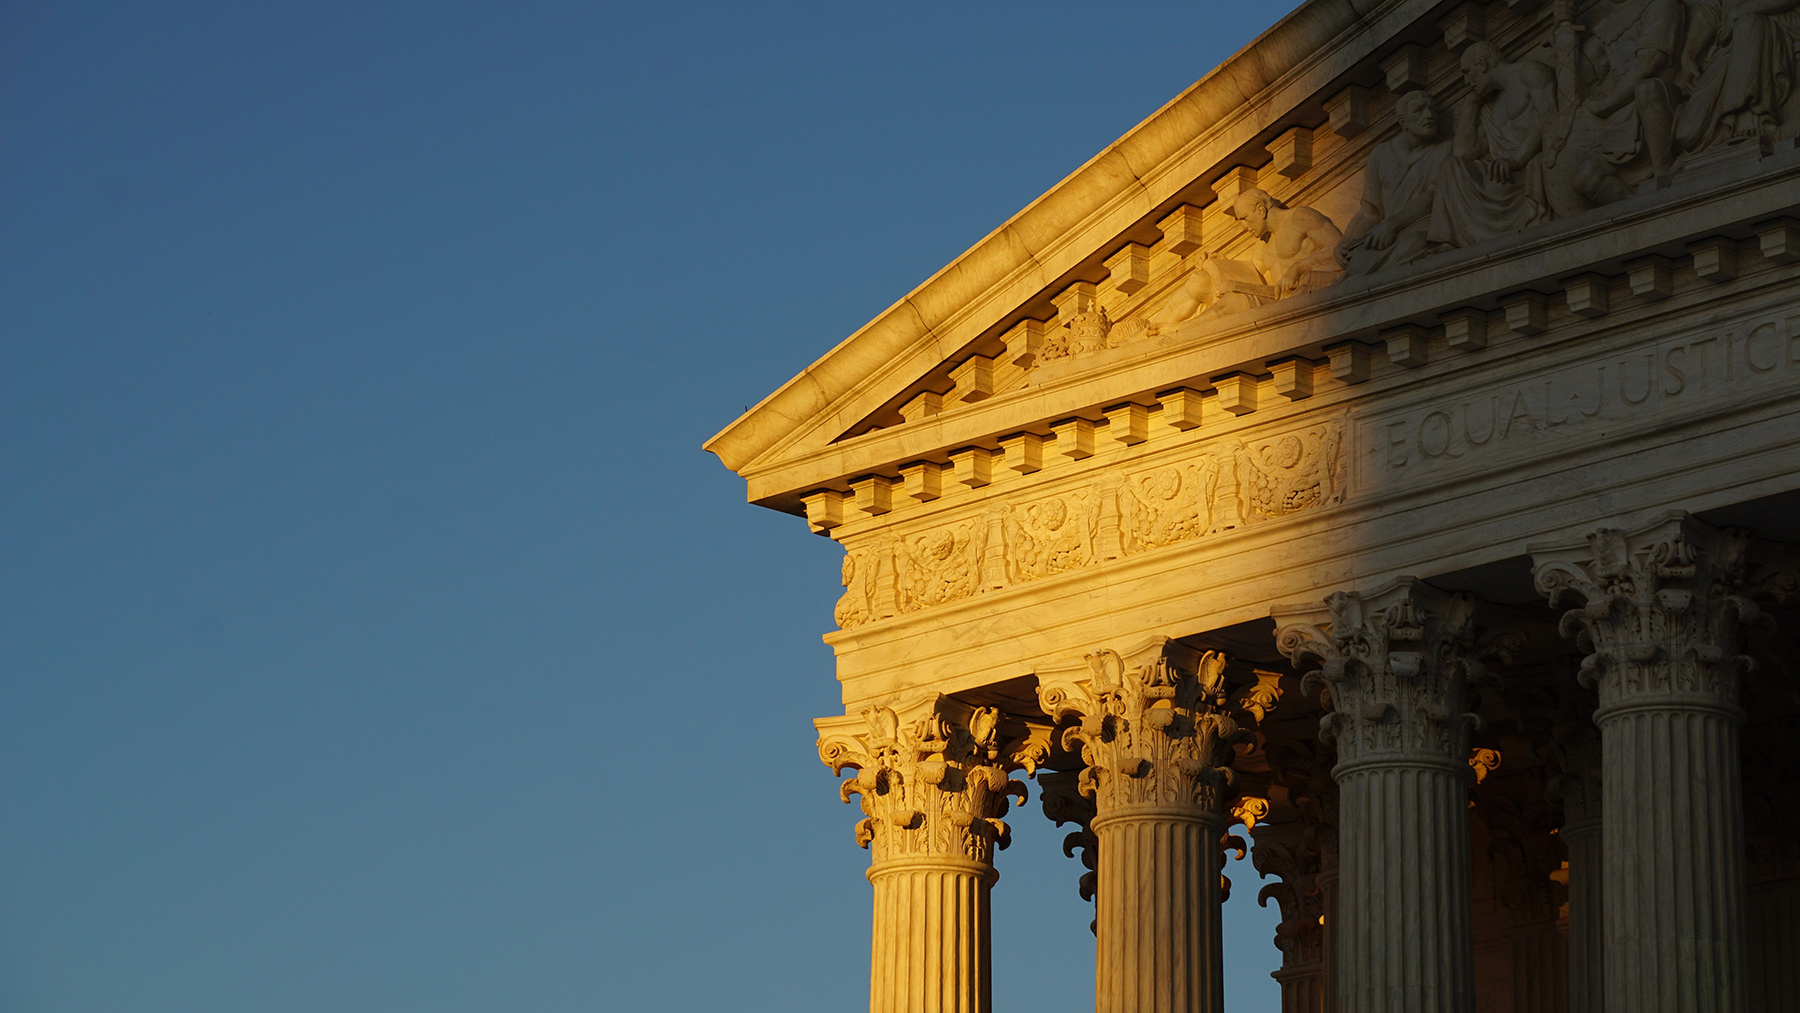 Photo of Supreme Court facade by Ian Hutchinson on Unsplash